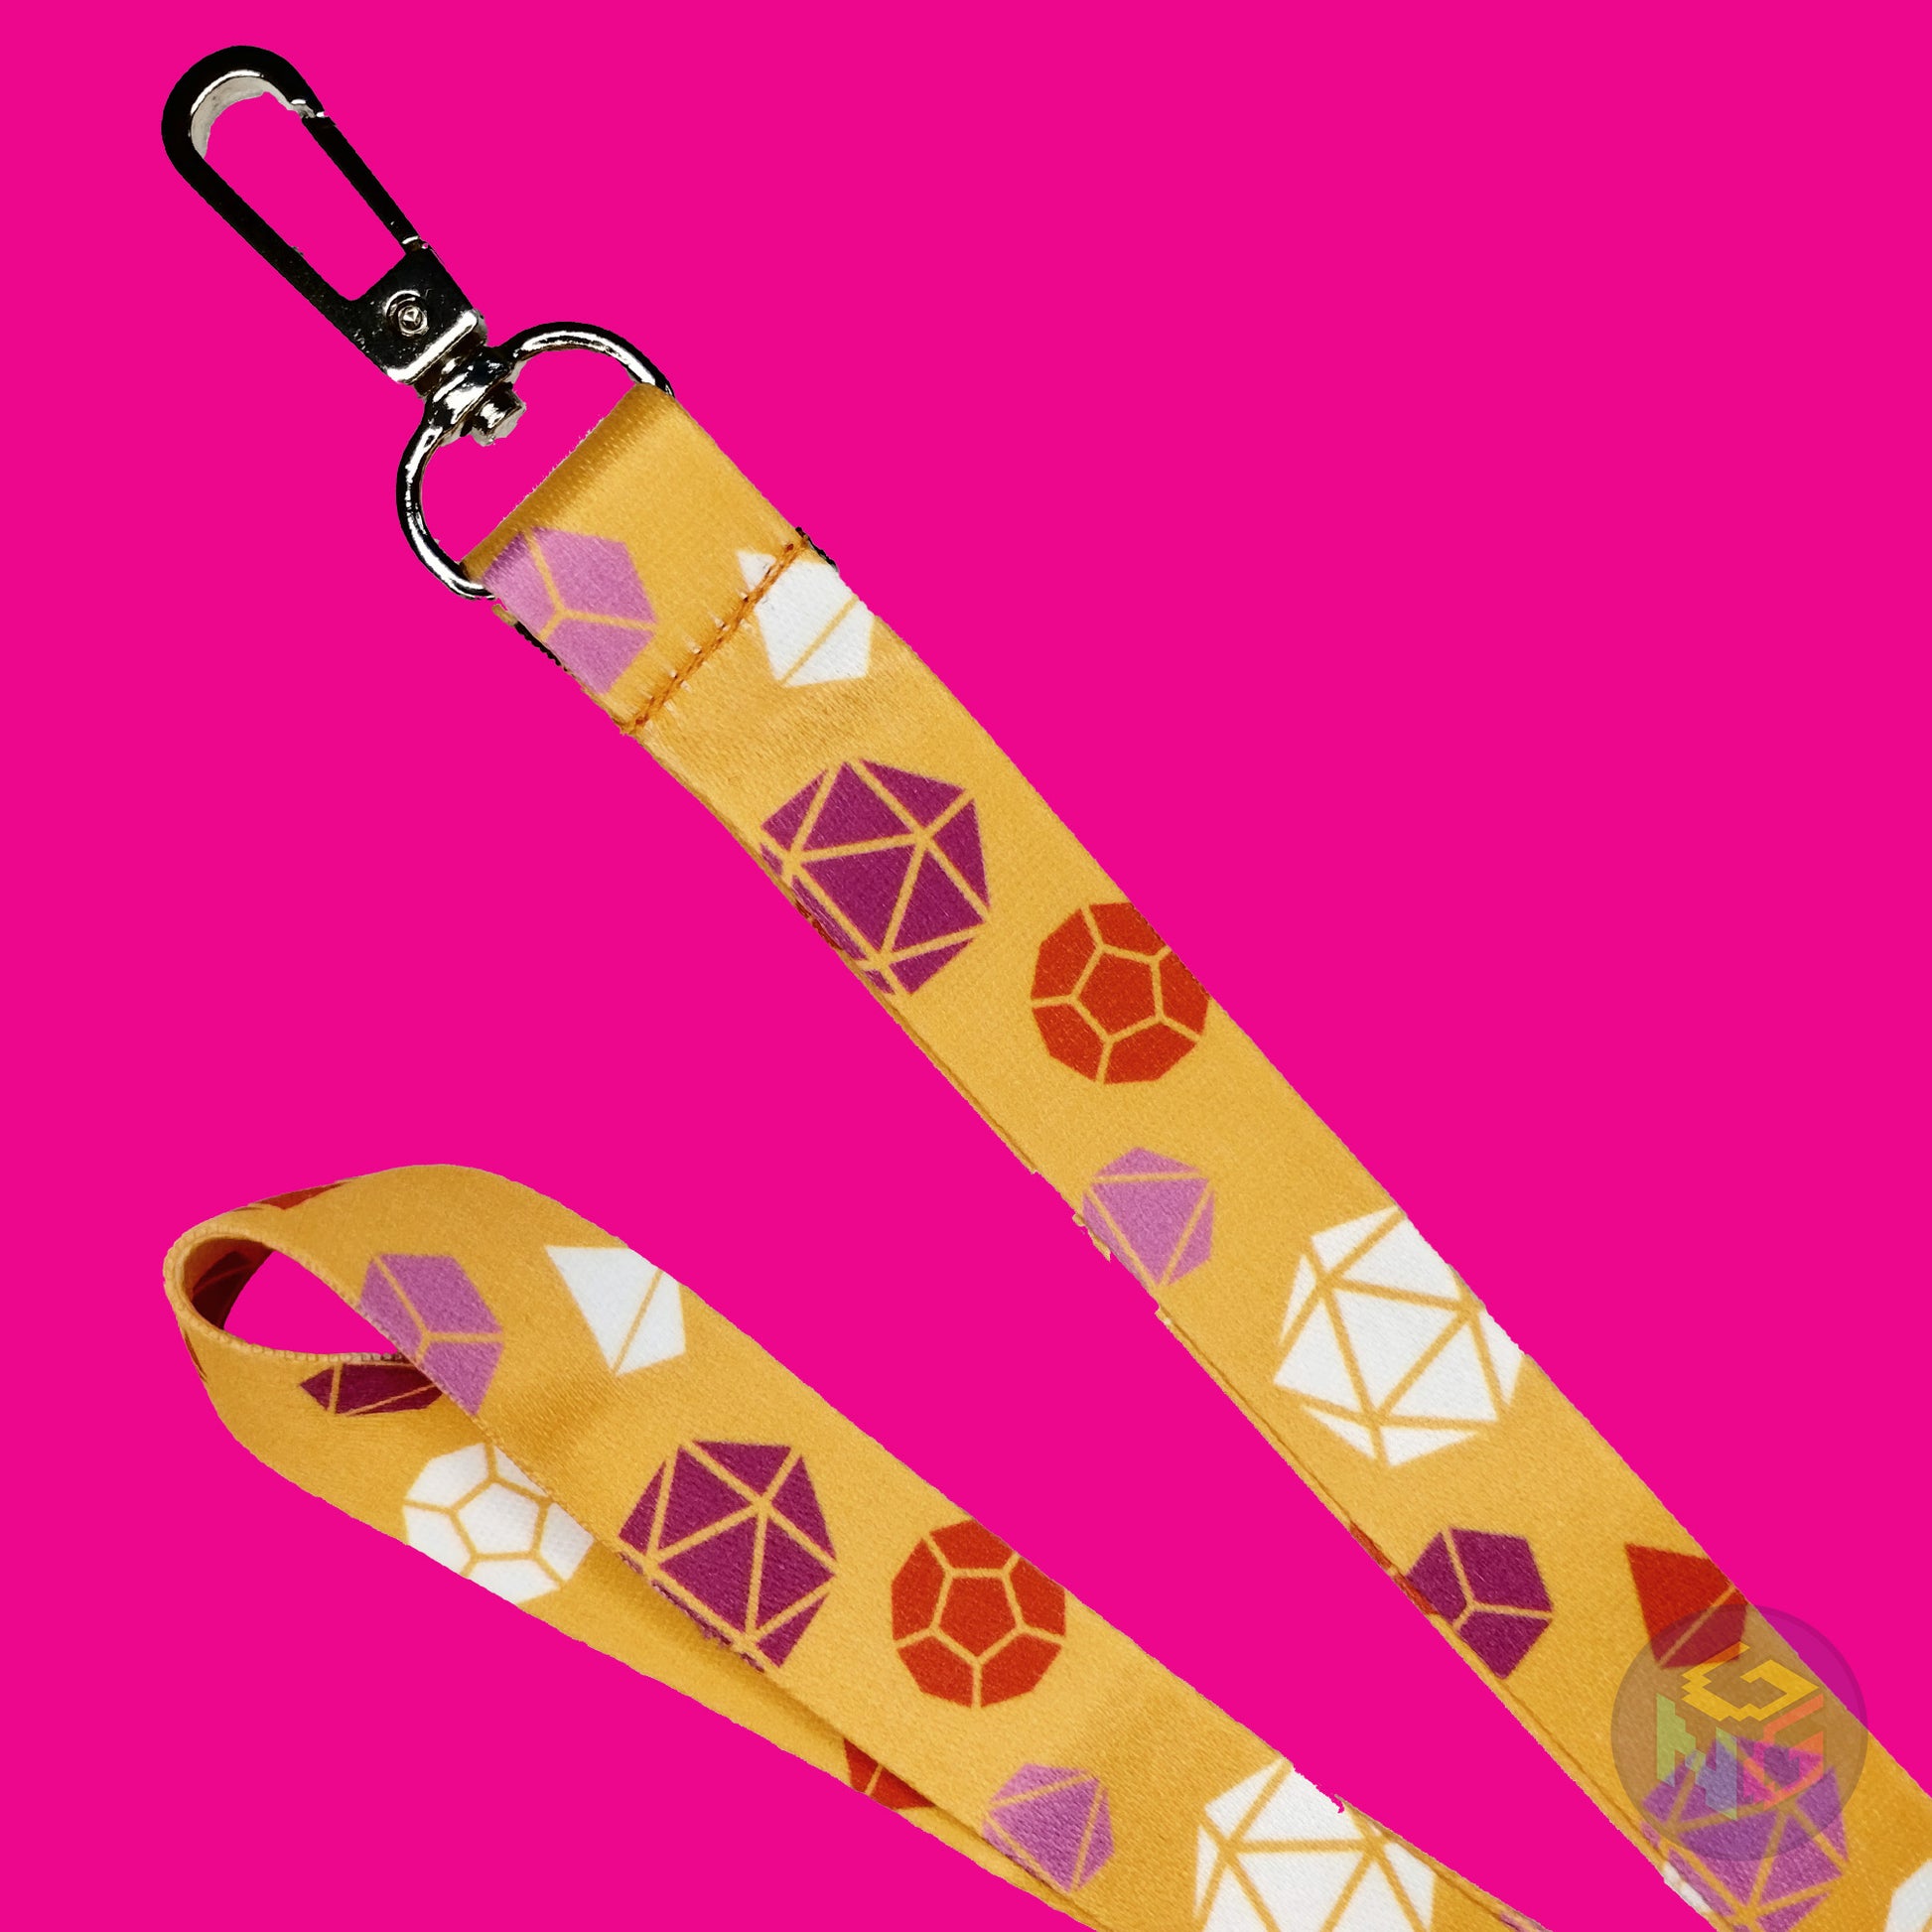 close up detail of the lesbian dungeons and dragons lanyard showing the lobster clasp, pink d20s, orange d12s, white d4s, and other dice